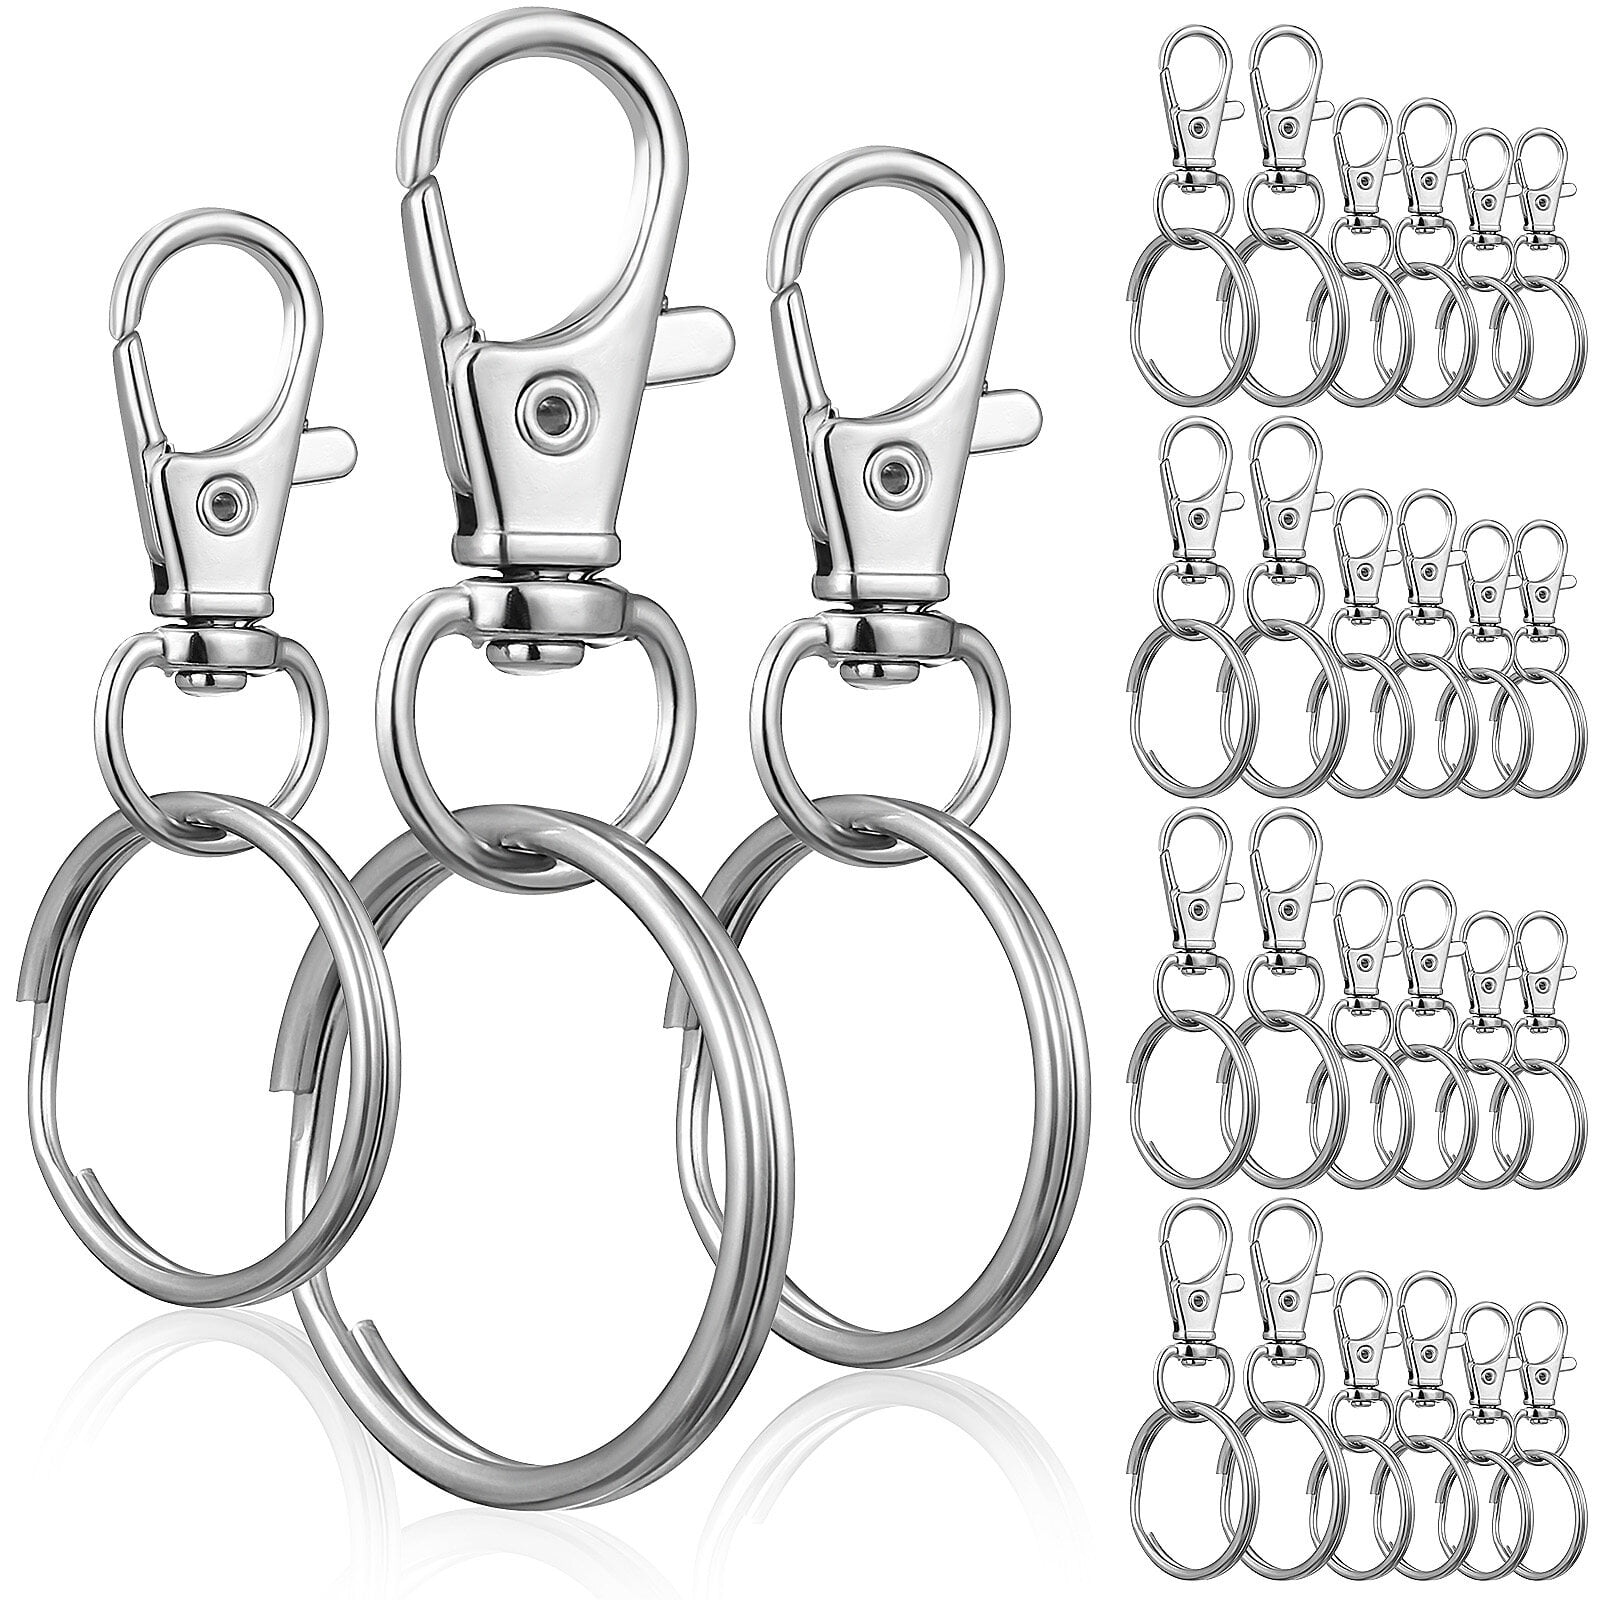 240PCS Metal Swivel Snap Hooks with Key Rings, LEOBRO 120PCS Small Lobster  Claw Keychains Clasps and 120PCS Key Chain Ring for Keychain Clip, Lanyard,  Key, Jewelry Making, Art Crafts, Silver : 